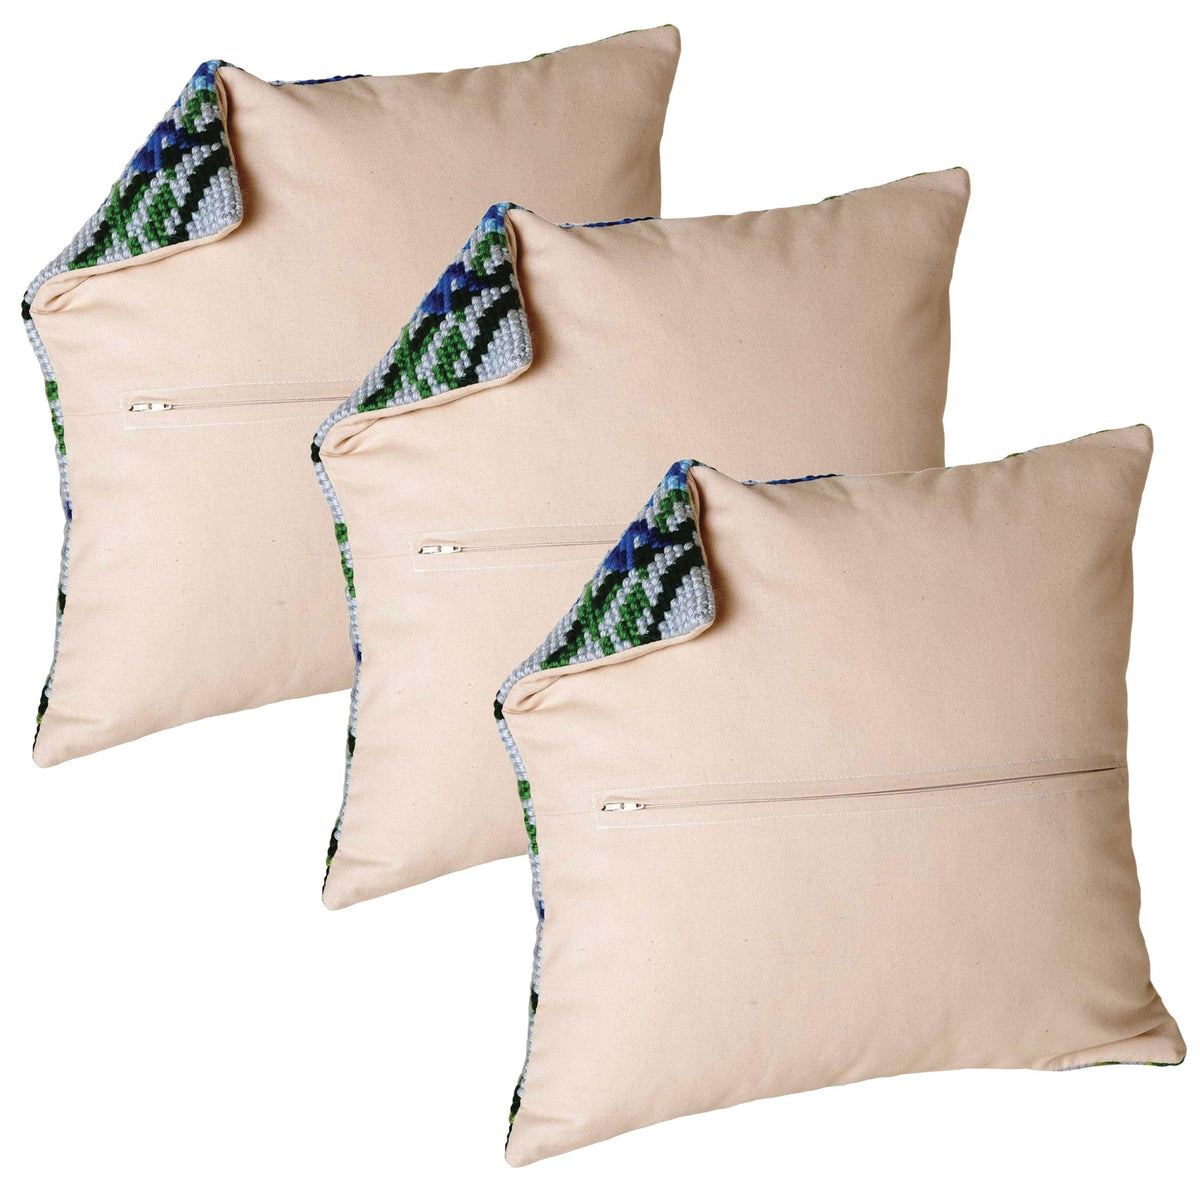 Thea Gouverneur Cushion Back Kit with Zipper - Set of 3 - Beige - For any 16x16 Inch (40x40cm) Cushion- Cross Stitch Creations - Embroidery - 23.59993 - Thea Gouverneur Since 1959